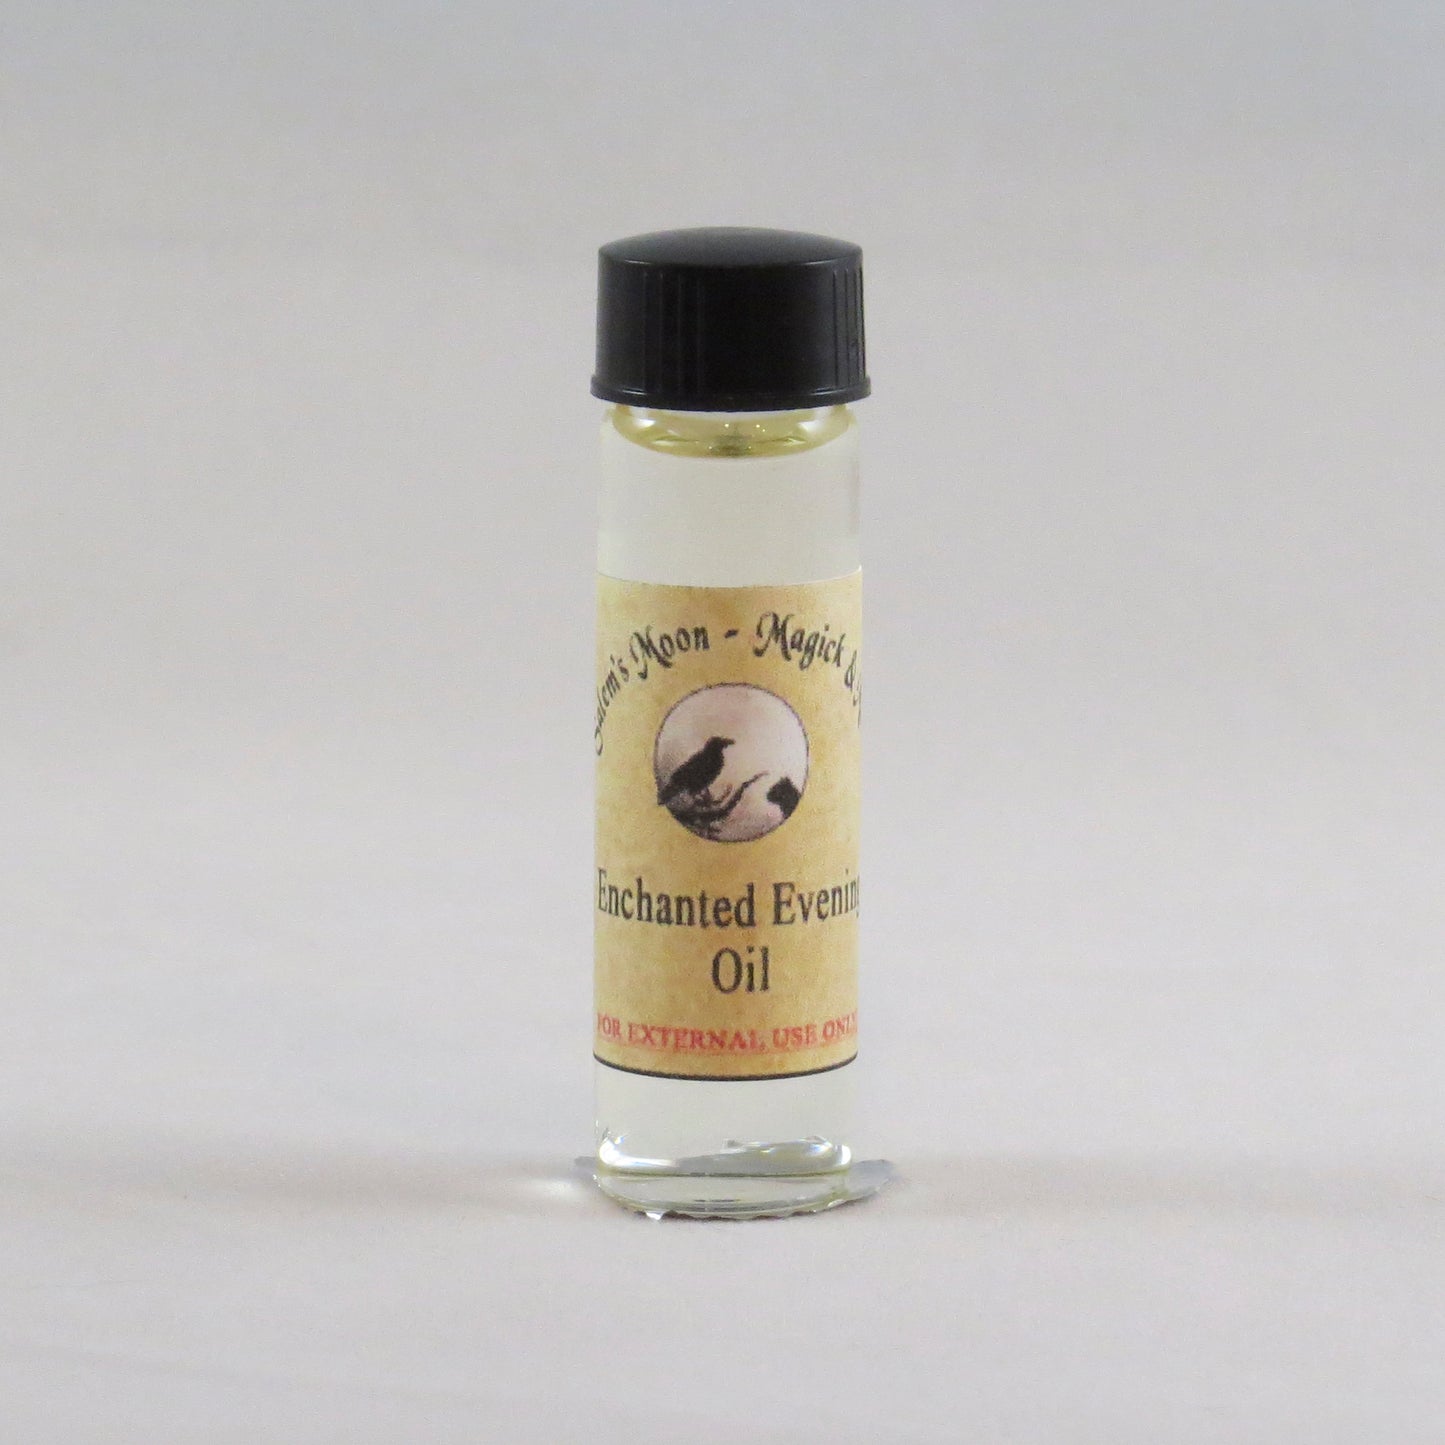 Enchanted Evening Oil